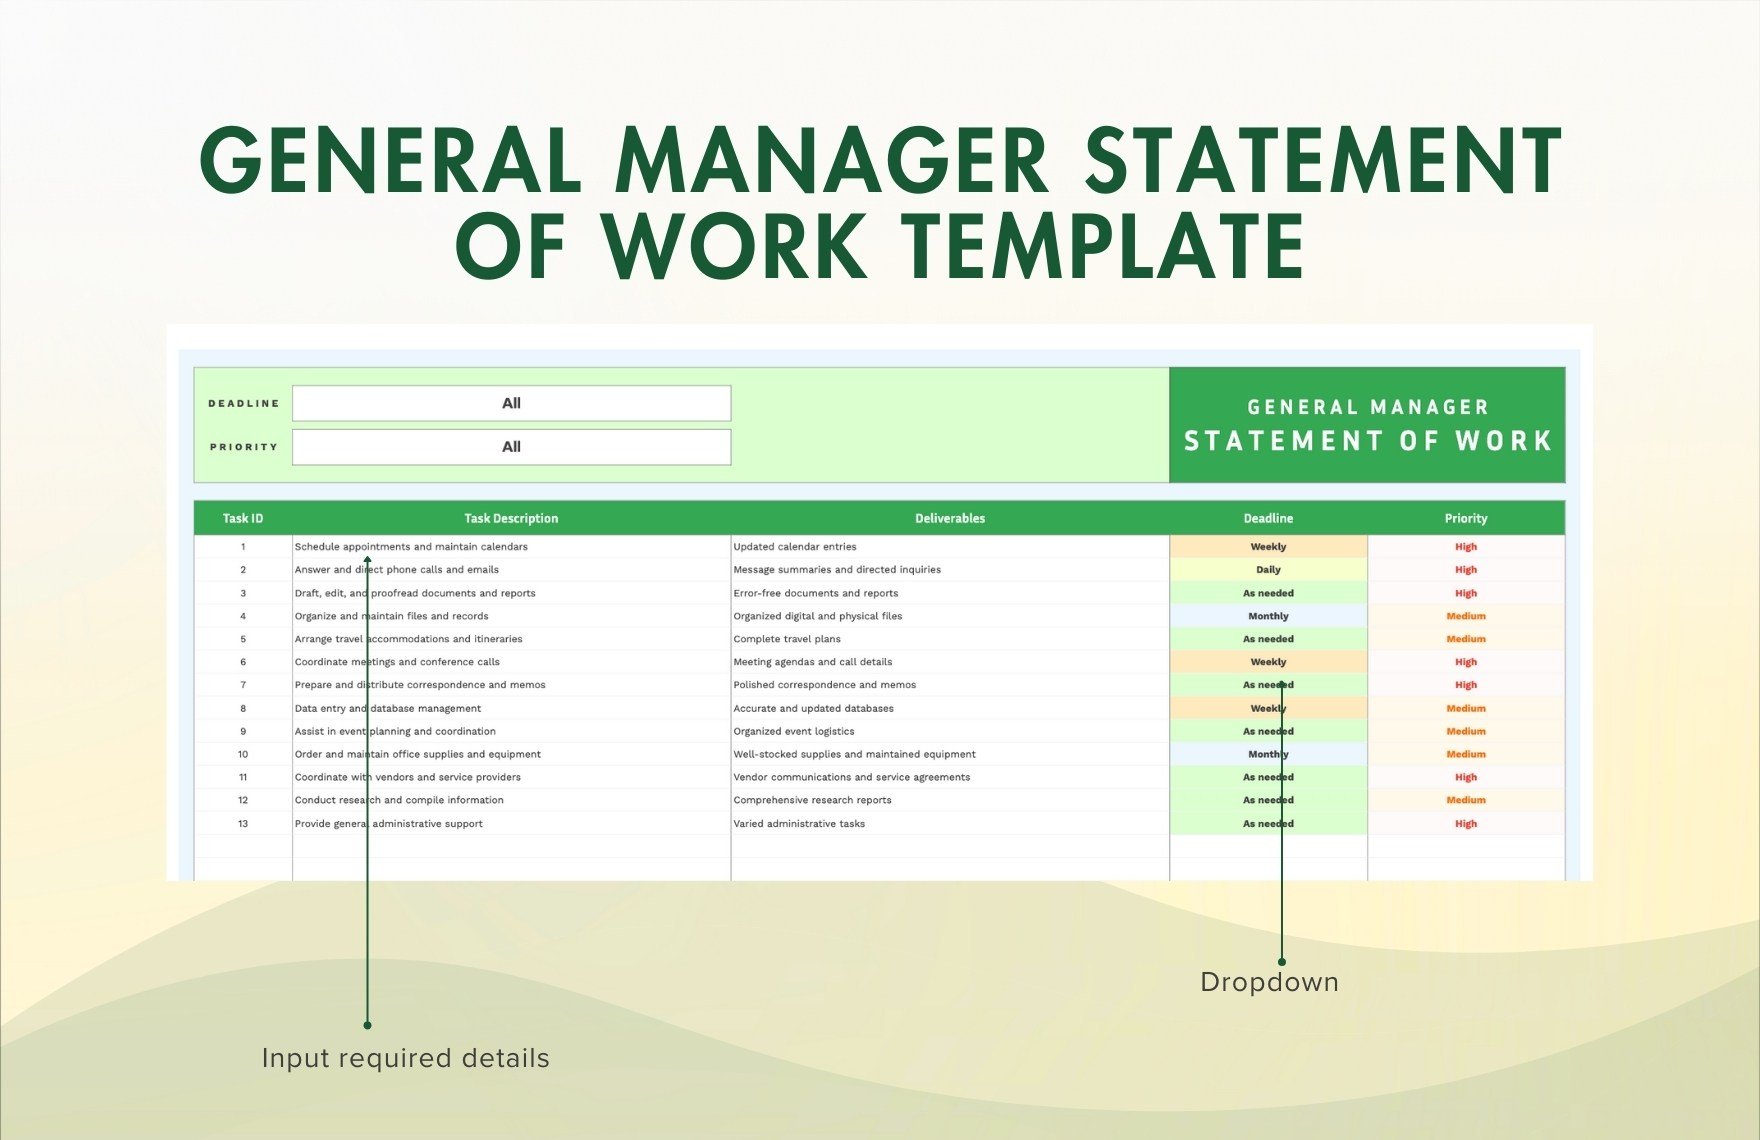 General Manager Statement of Work Template